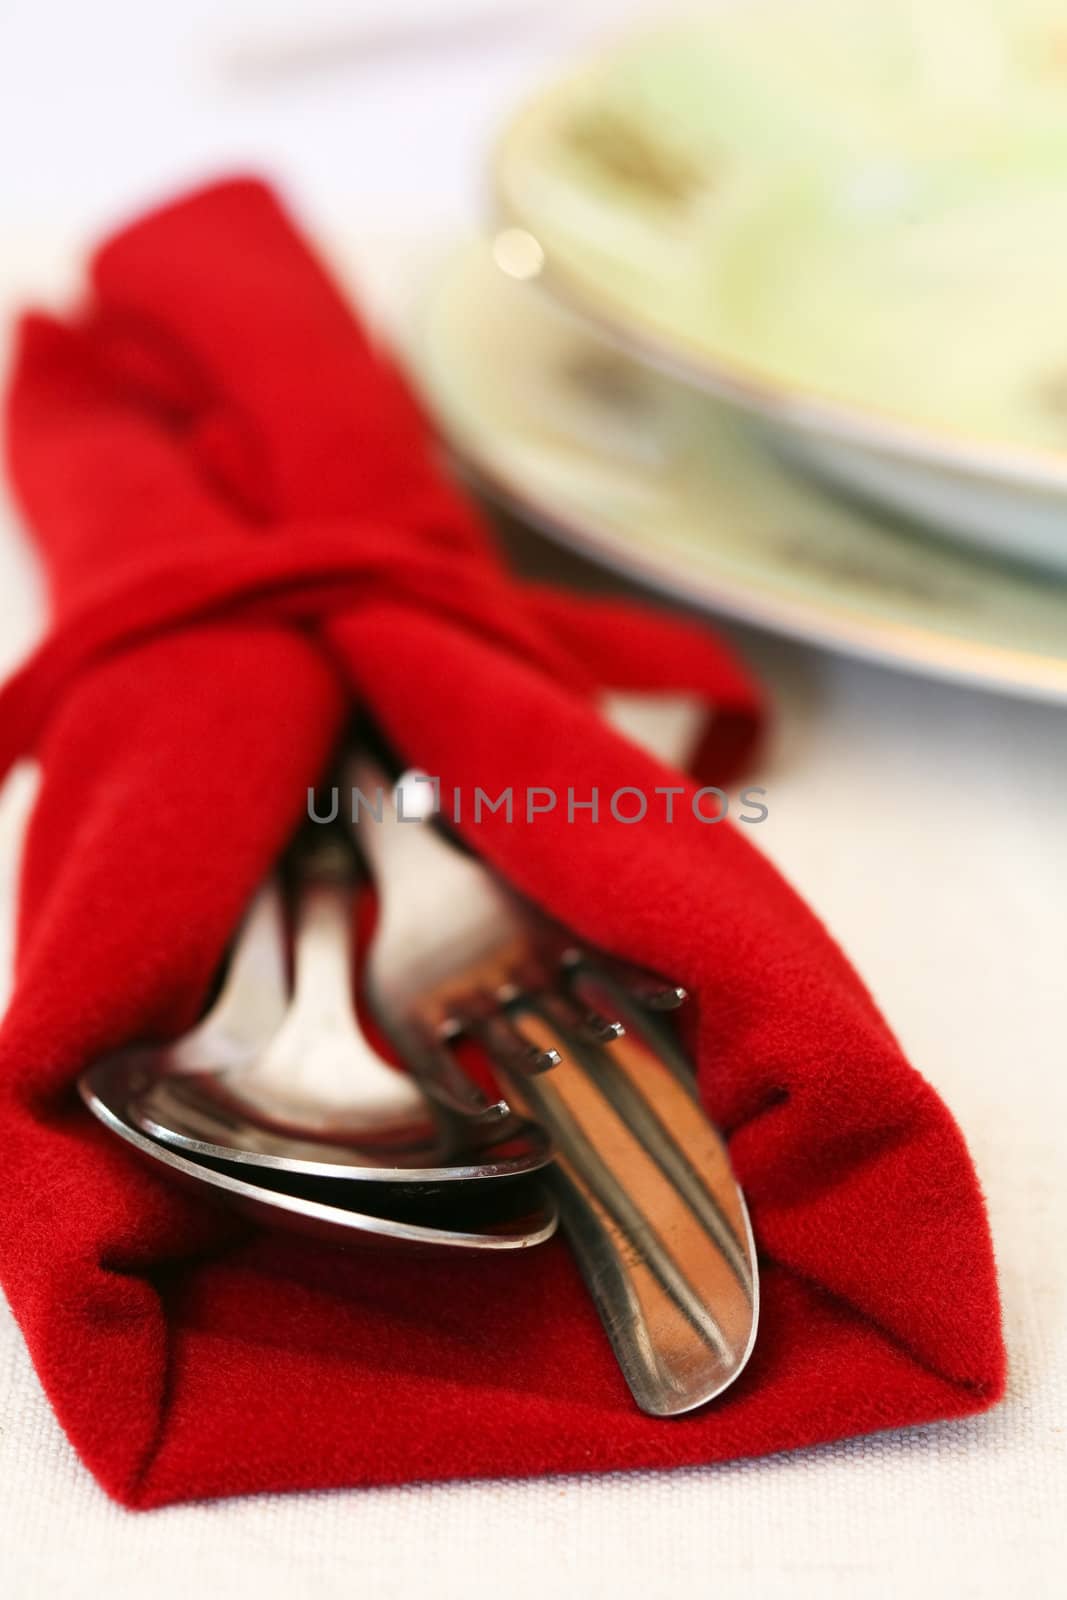 knife and spoon and fork closeup by velkol